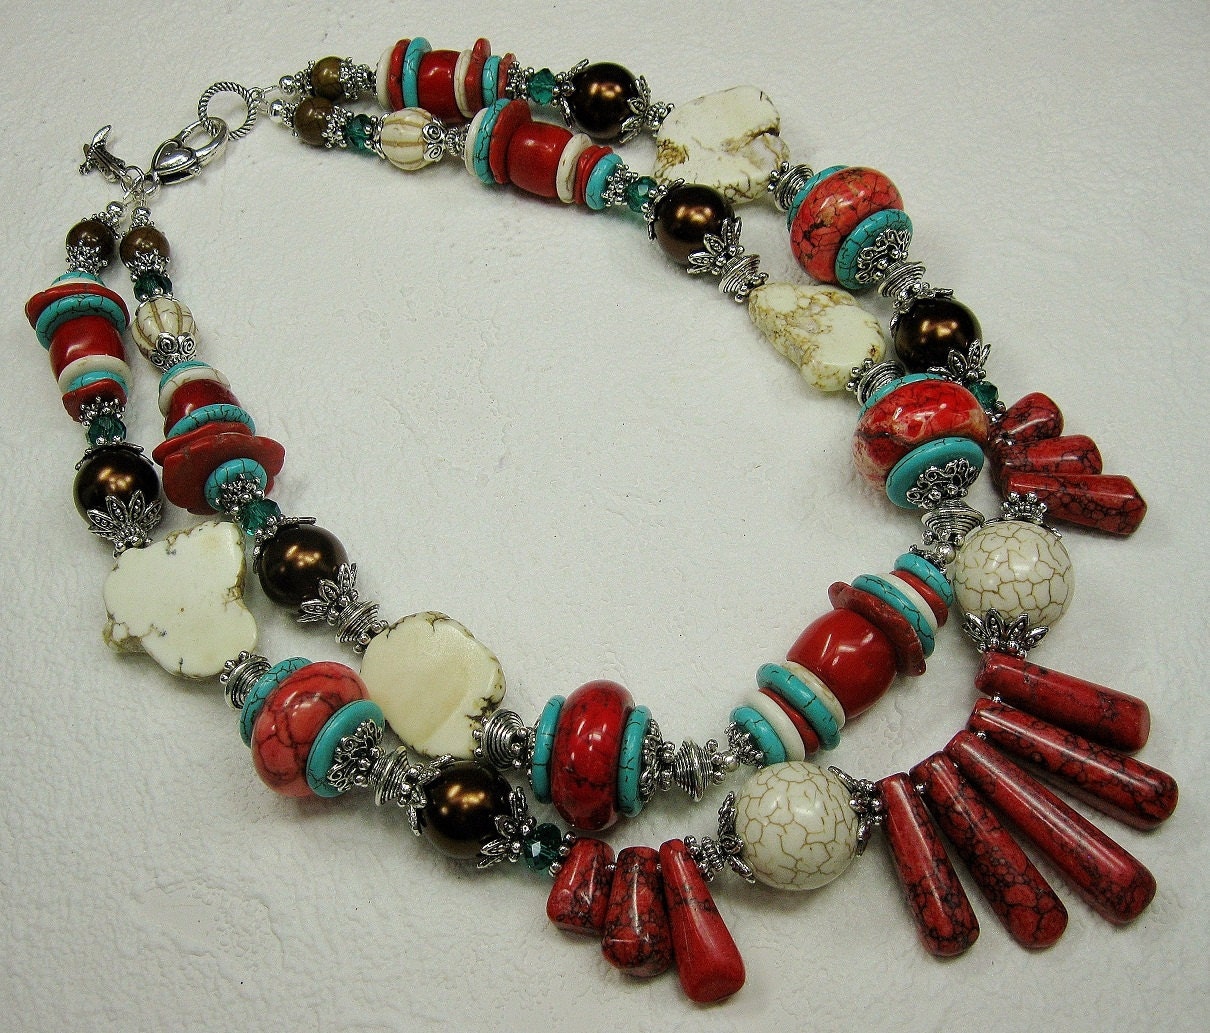 SOUTHWESTERN STYLE Cowgirl Necklace Chunky Red / Turquoise